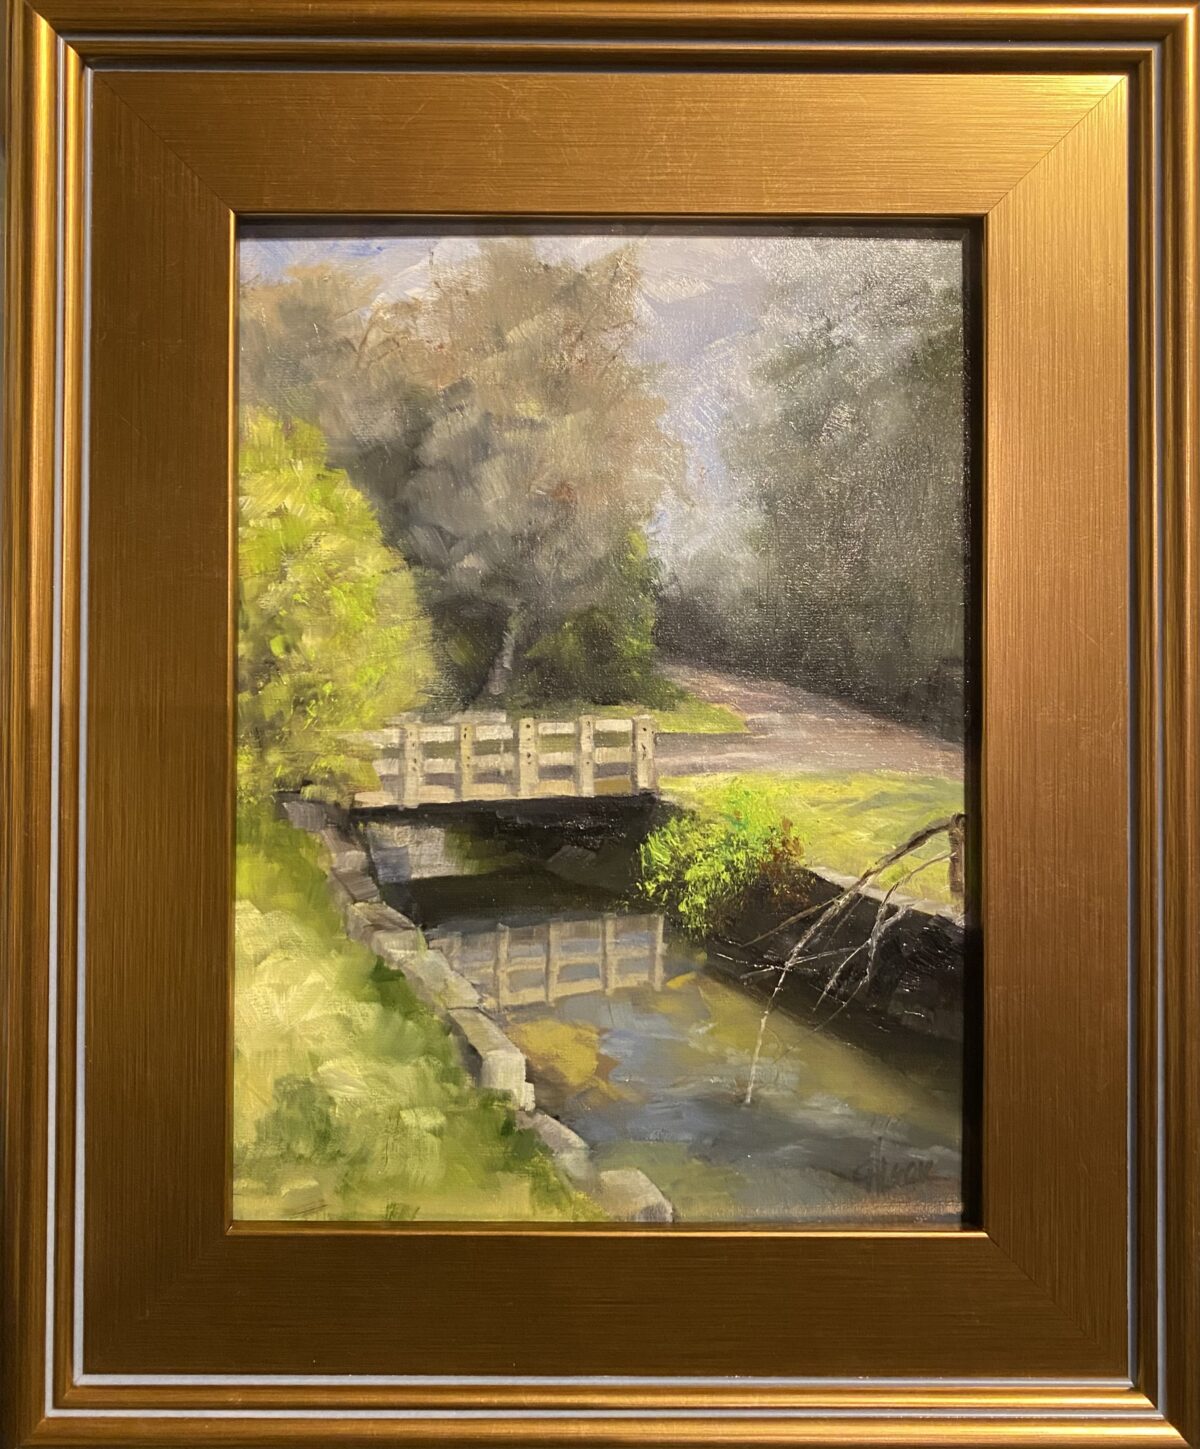 Oil painting of Lower Cascades Park showcasing a serene bridge over a tranquil stream surrounded by lush greenery, by artist Henry Leck.